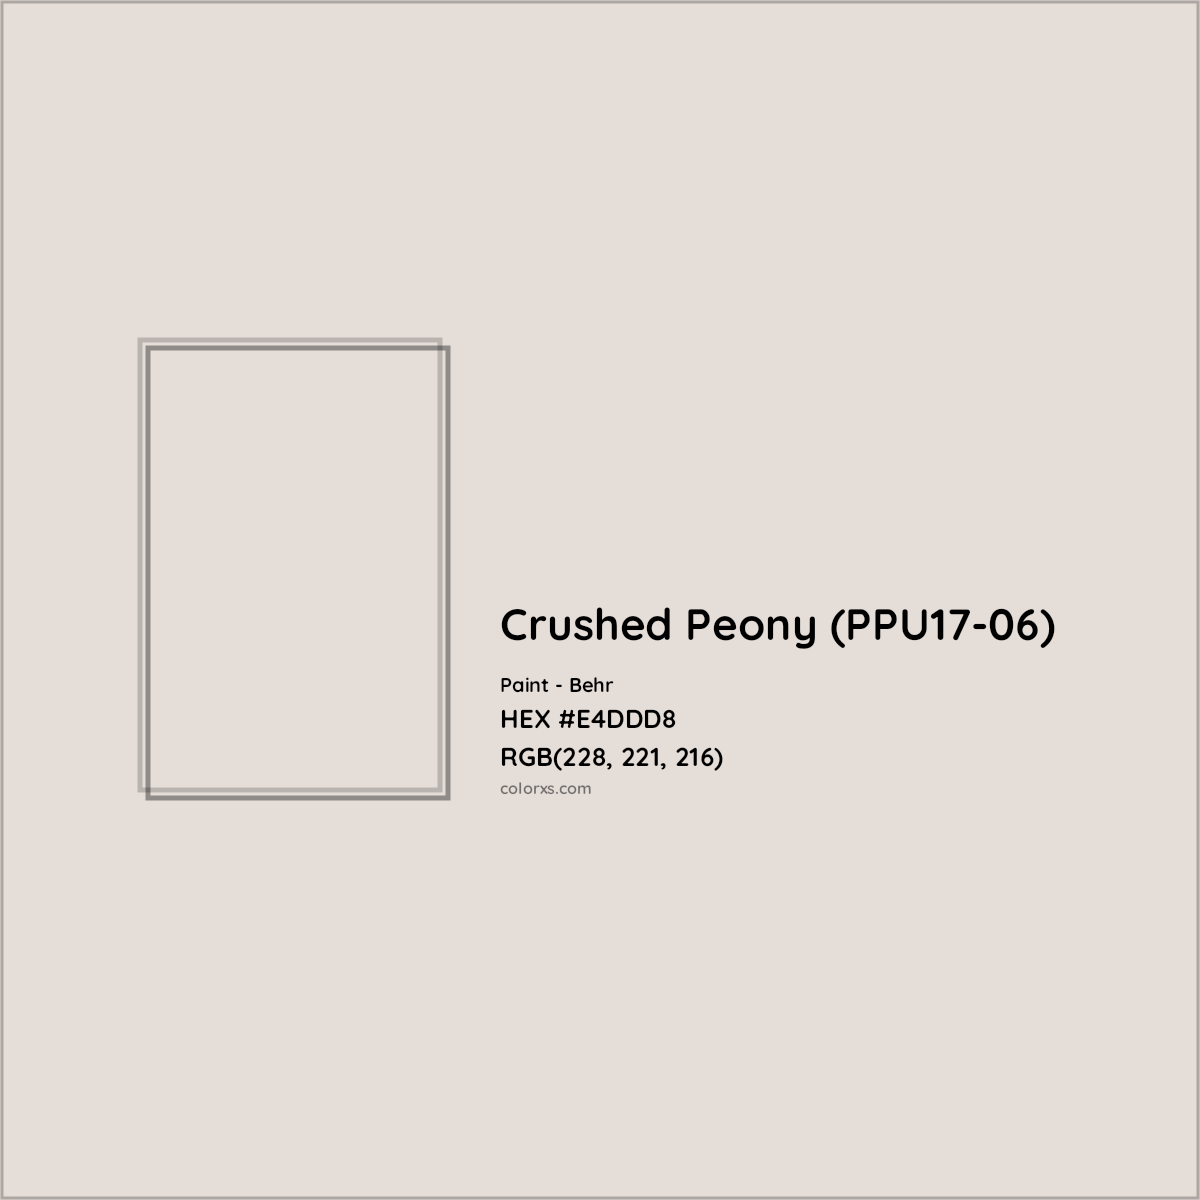 HEX #E4DDD8 Crushed Peony (PPU17-06) Paint Behr - Color Code